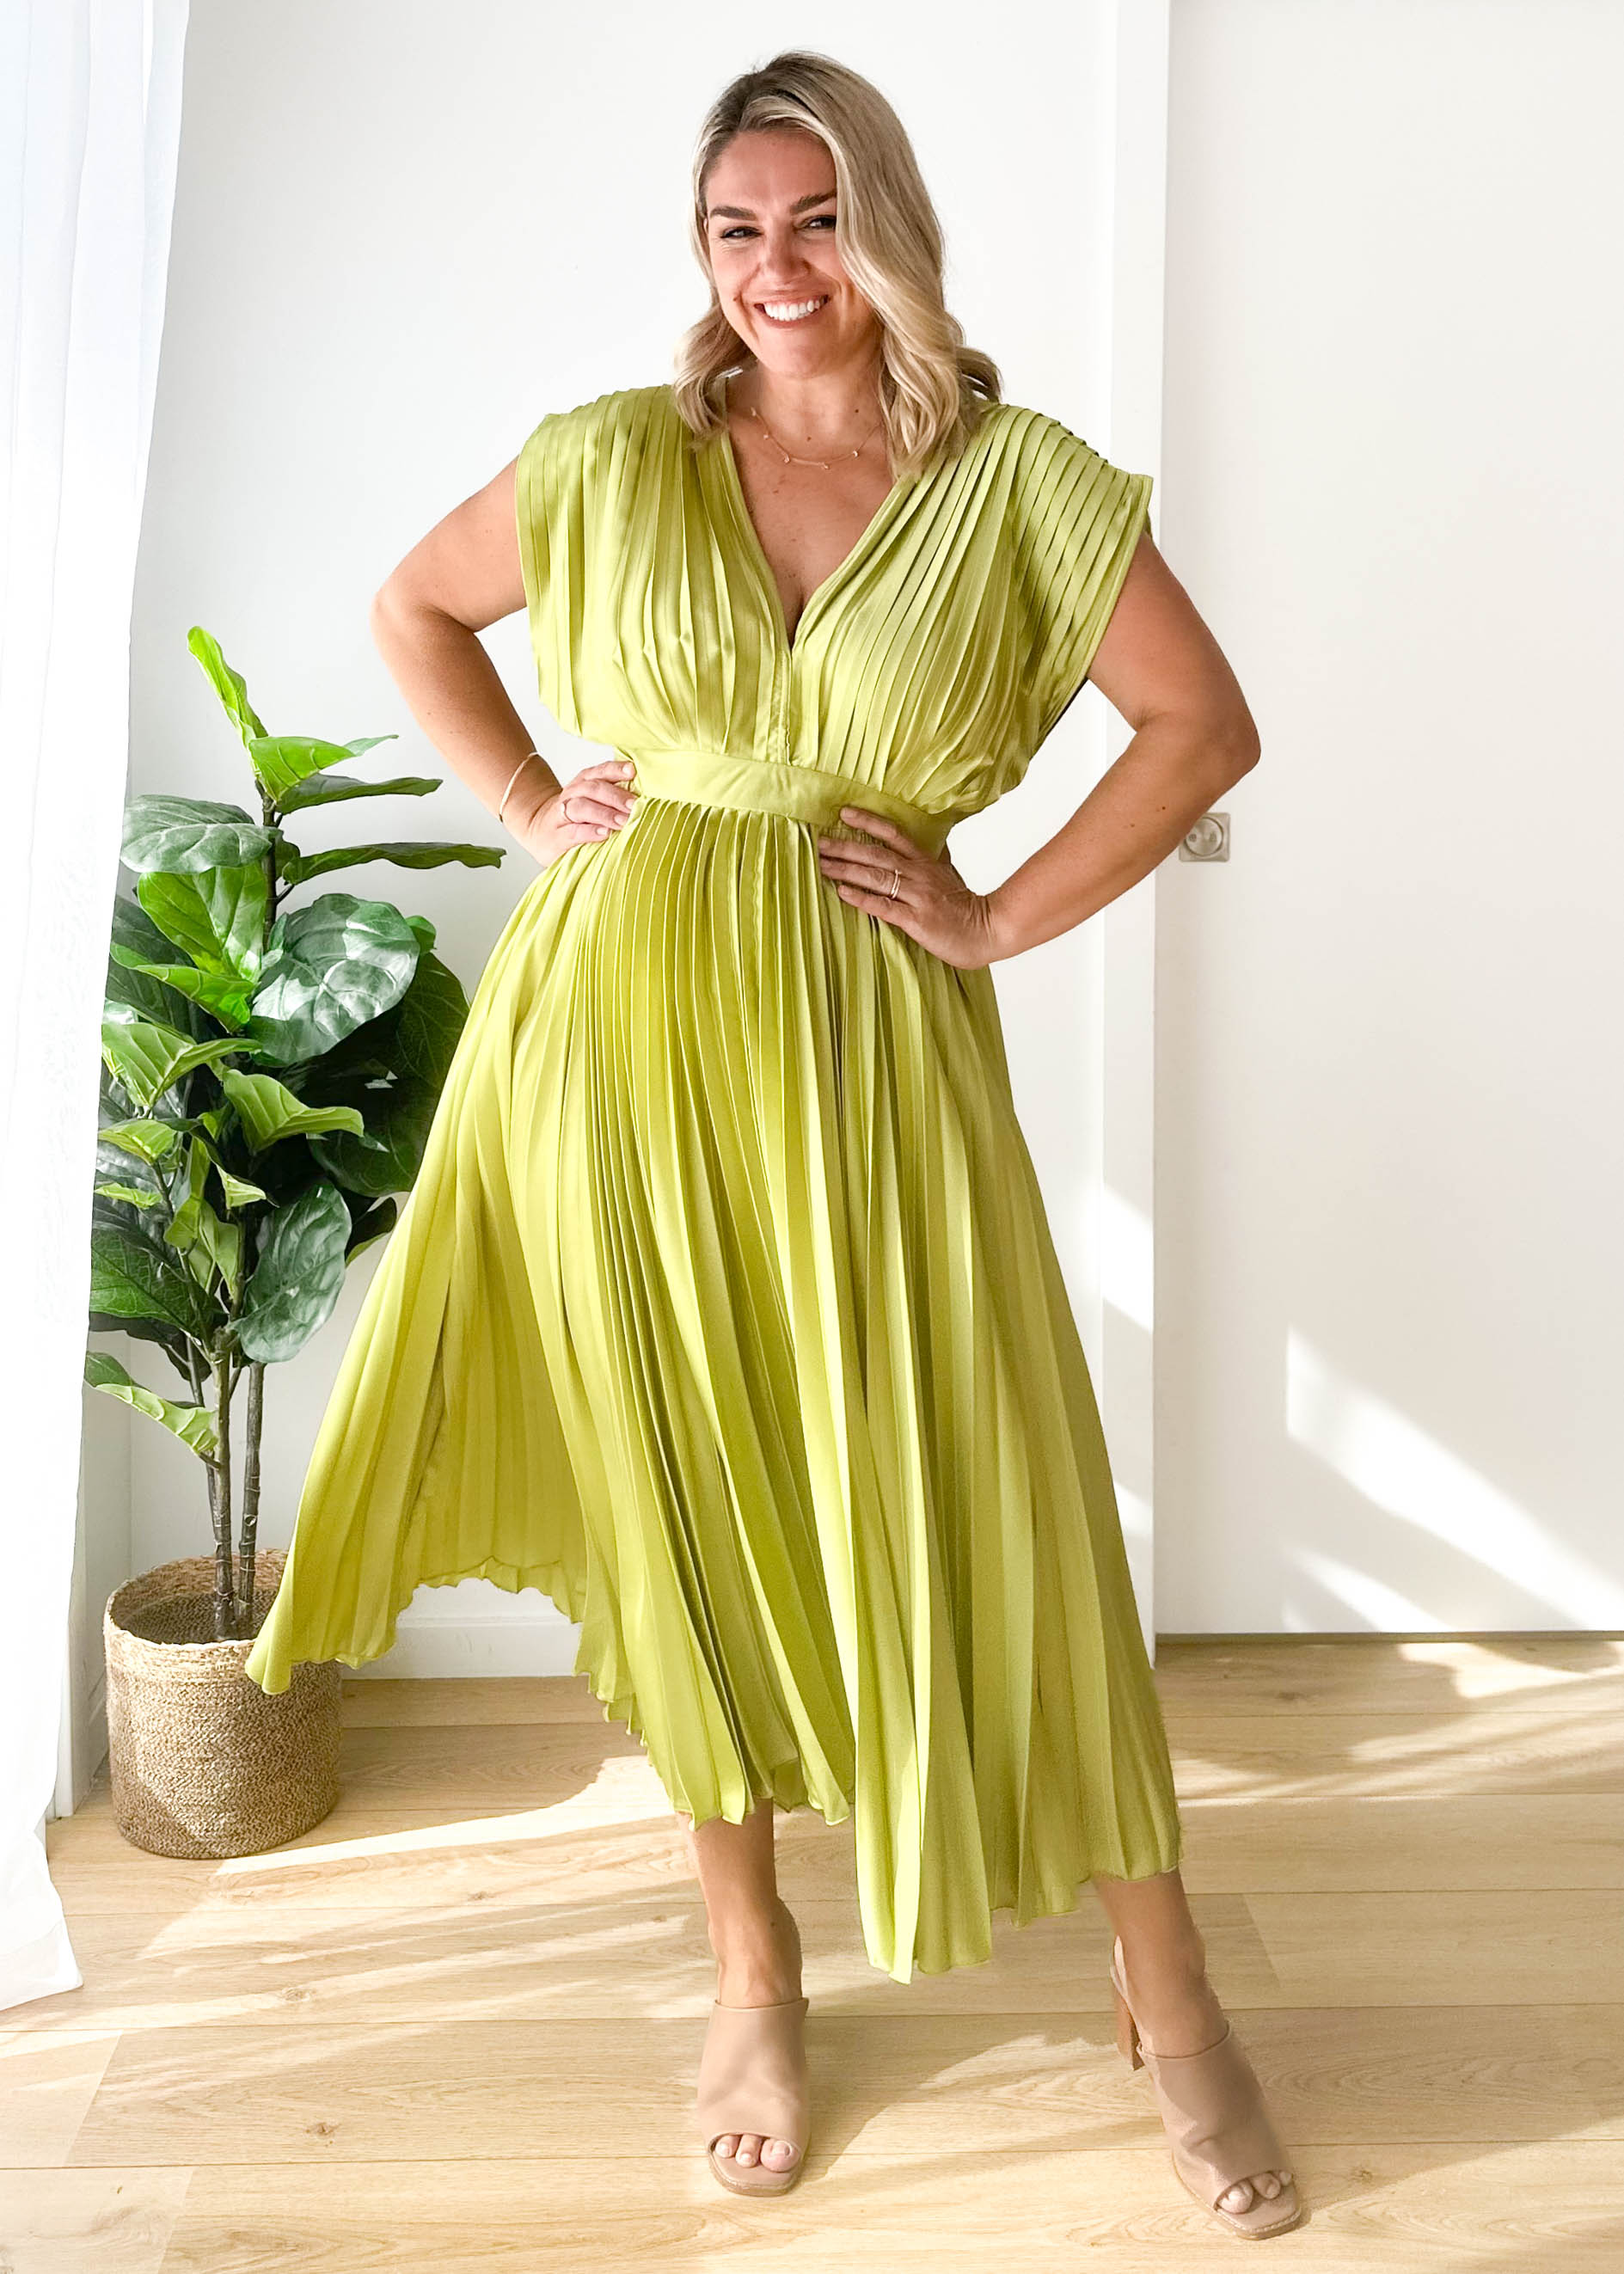 New Look Green Ditsy Wrap Dress Sells Out | Glamour UK